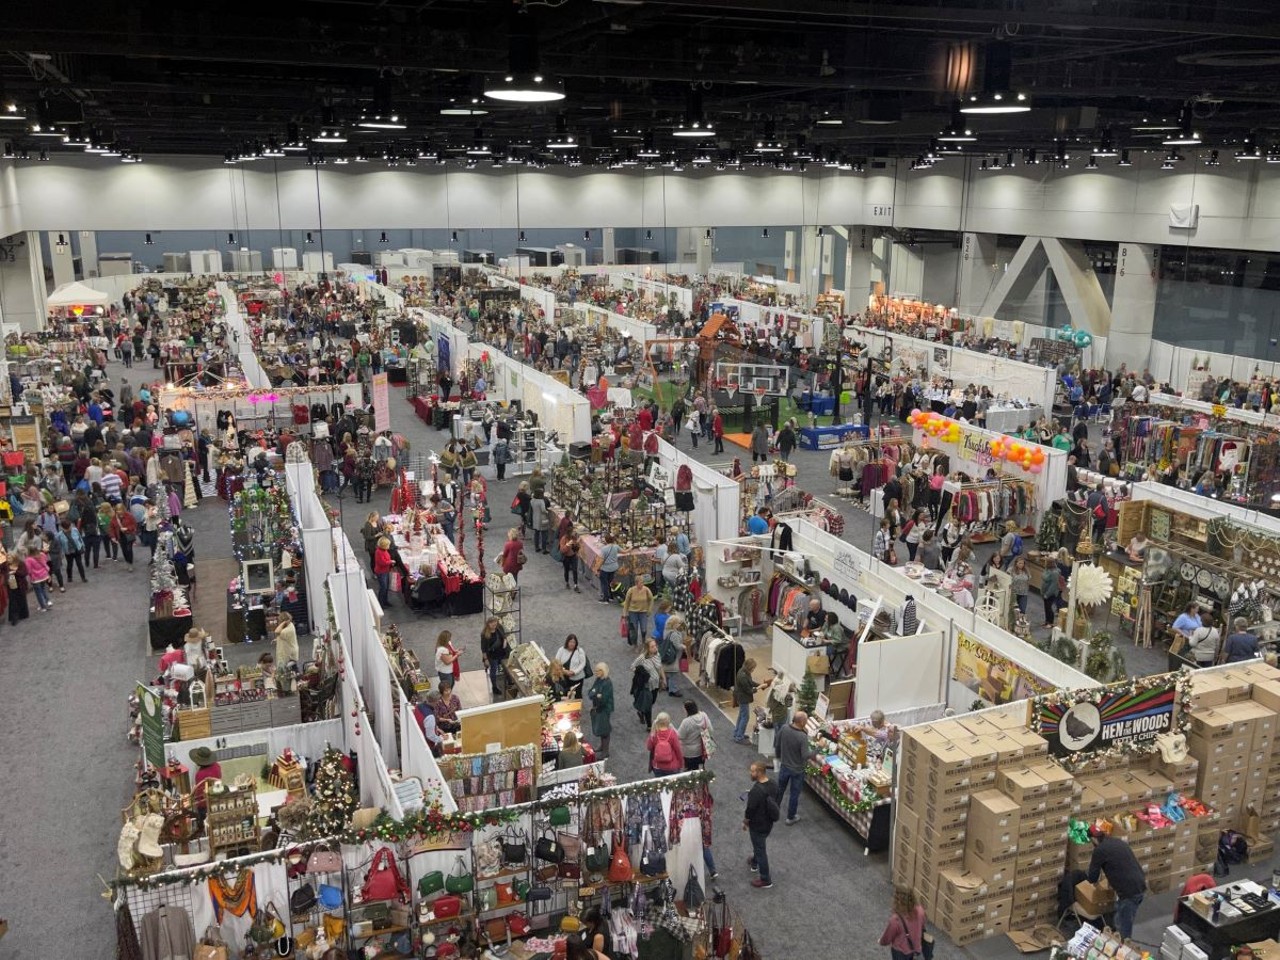 Greater Cincinnati Holiday Market
When: Nov. 9-12
Where: The Duke Energy Convention Center, Downtown
What: Countless vendors and their crafty items fit for the holidays.
Who: Presented by General Electric Credit Union
Why: If you haven't started holiday shopping yet, here's your opportunity to begin.